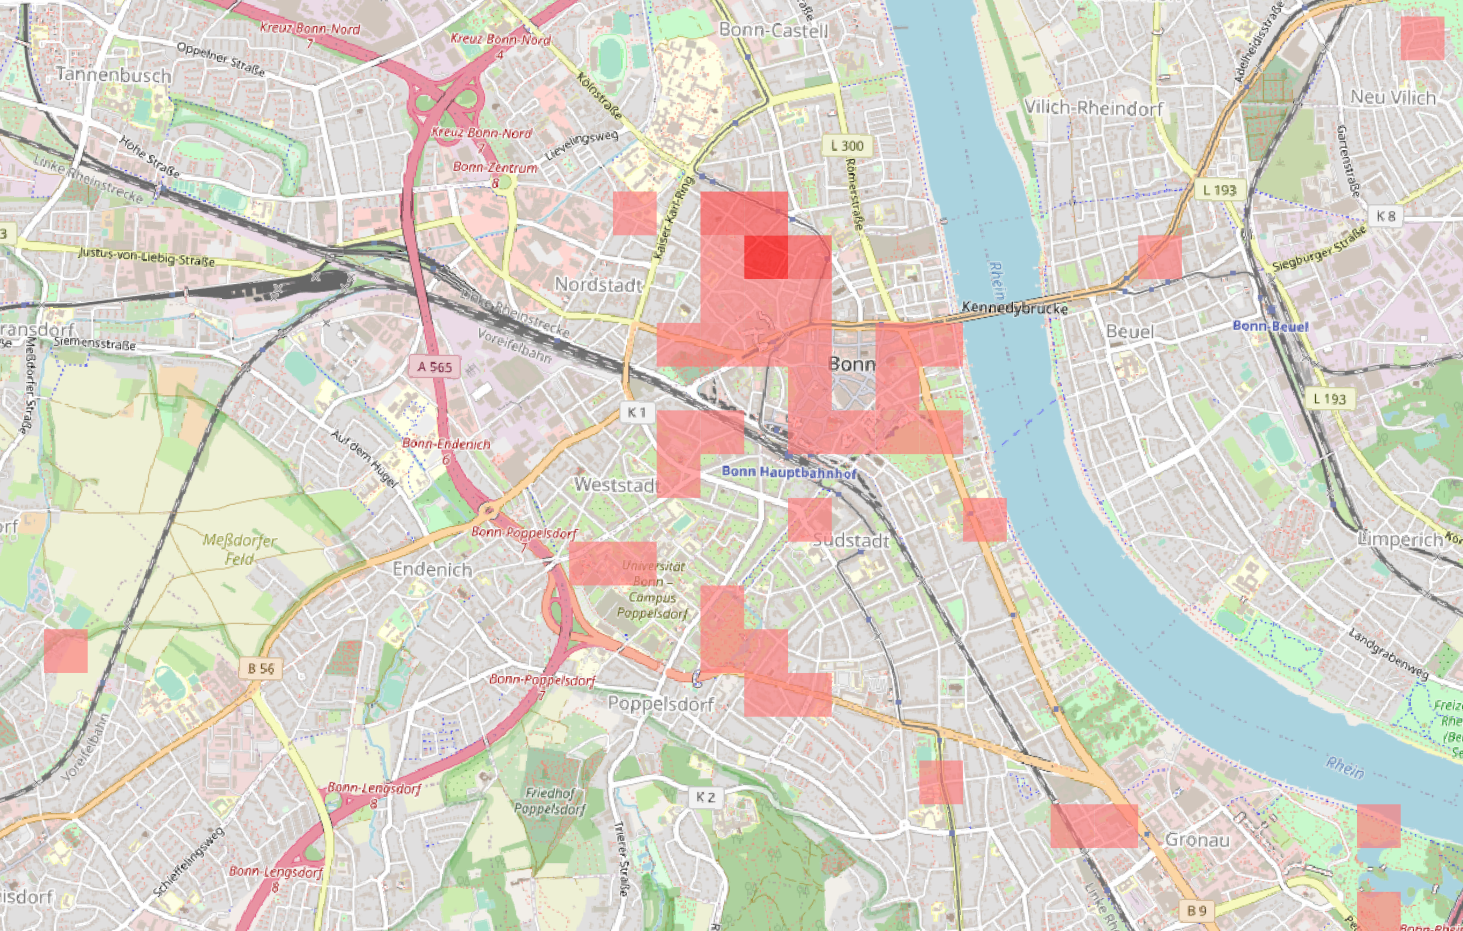 The squares marked in red indicate where cherry blossoms were photographed. The darker the square, the more photos of cherry blossoms were taken (light red: 1 to 26 images; red: 27 to 52 images; dark red: 53 to 77 images). The total data set includes 380 images.